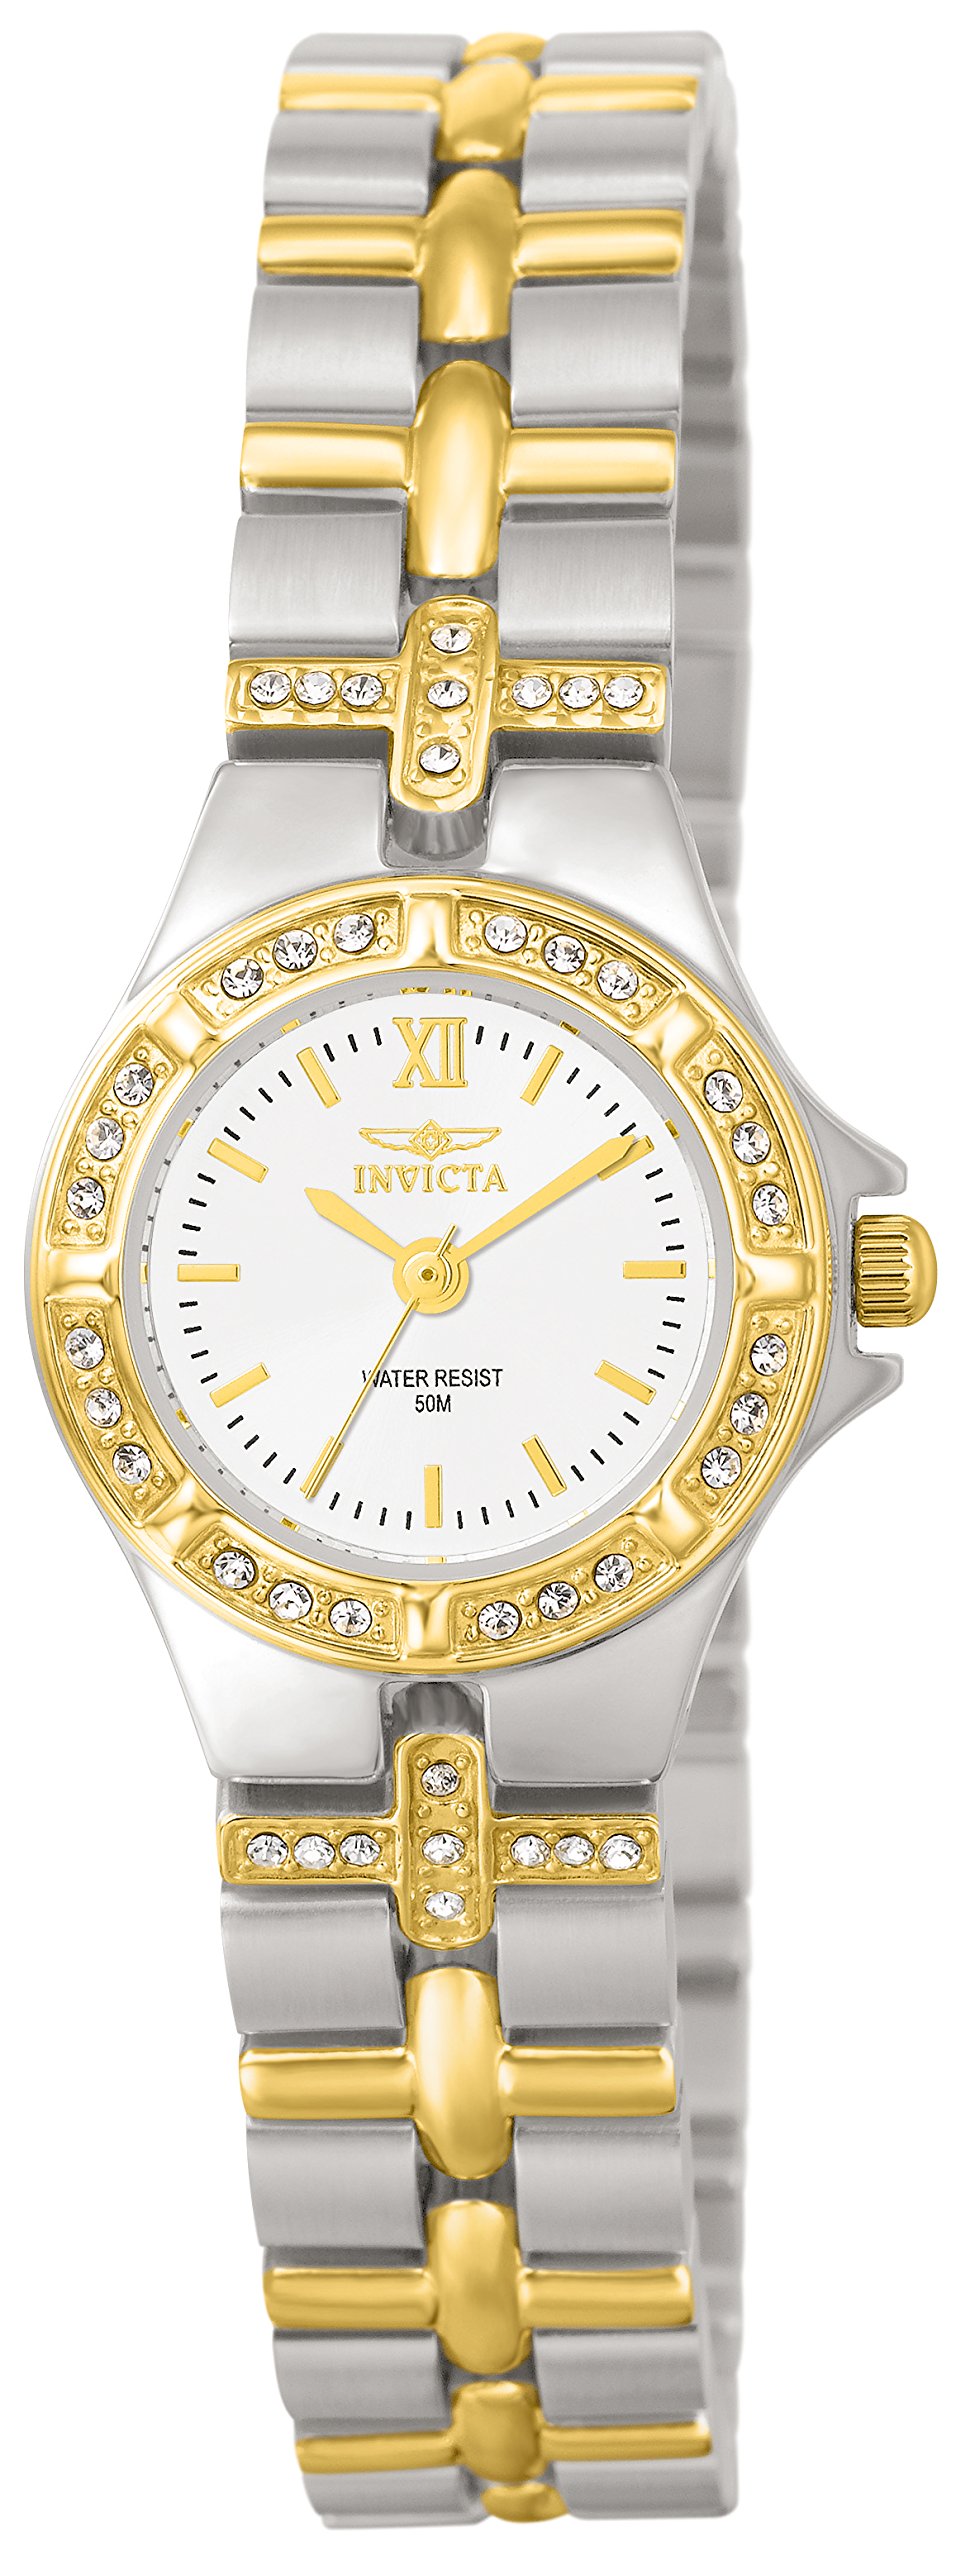 Invicta Women's 0133 Wildflower Collection 18k Gold-Plated and Stainless Steel Watch